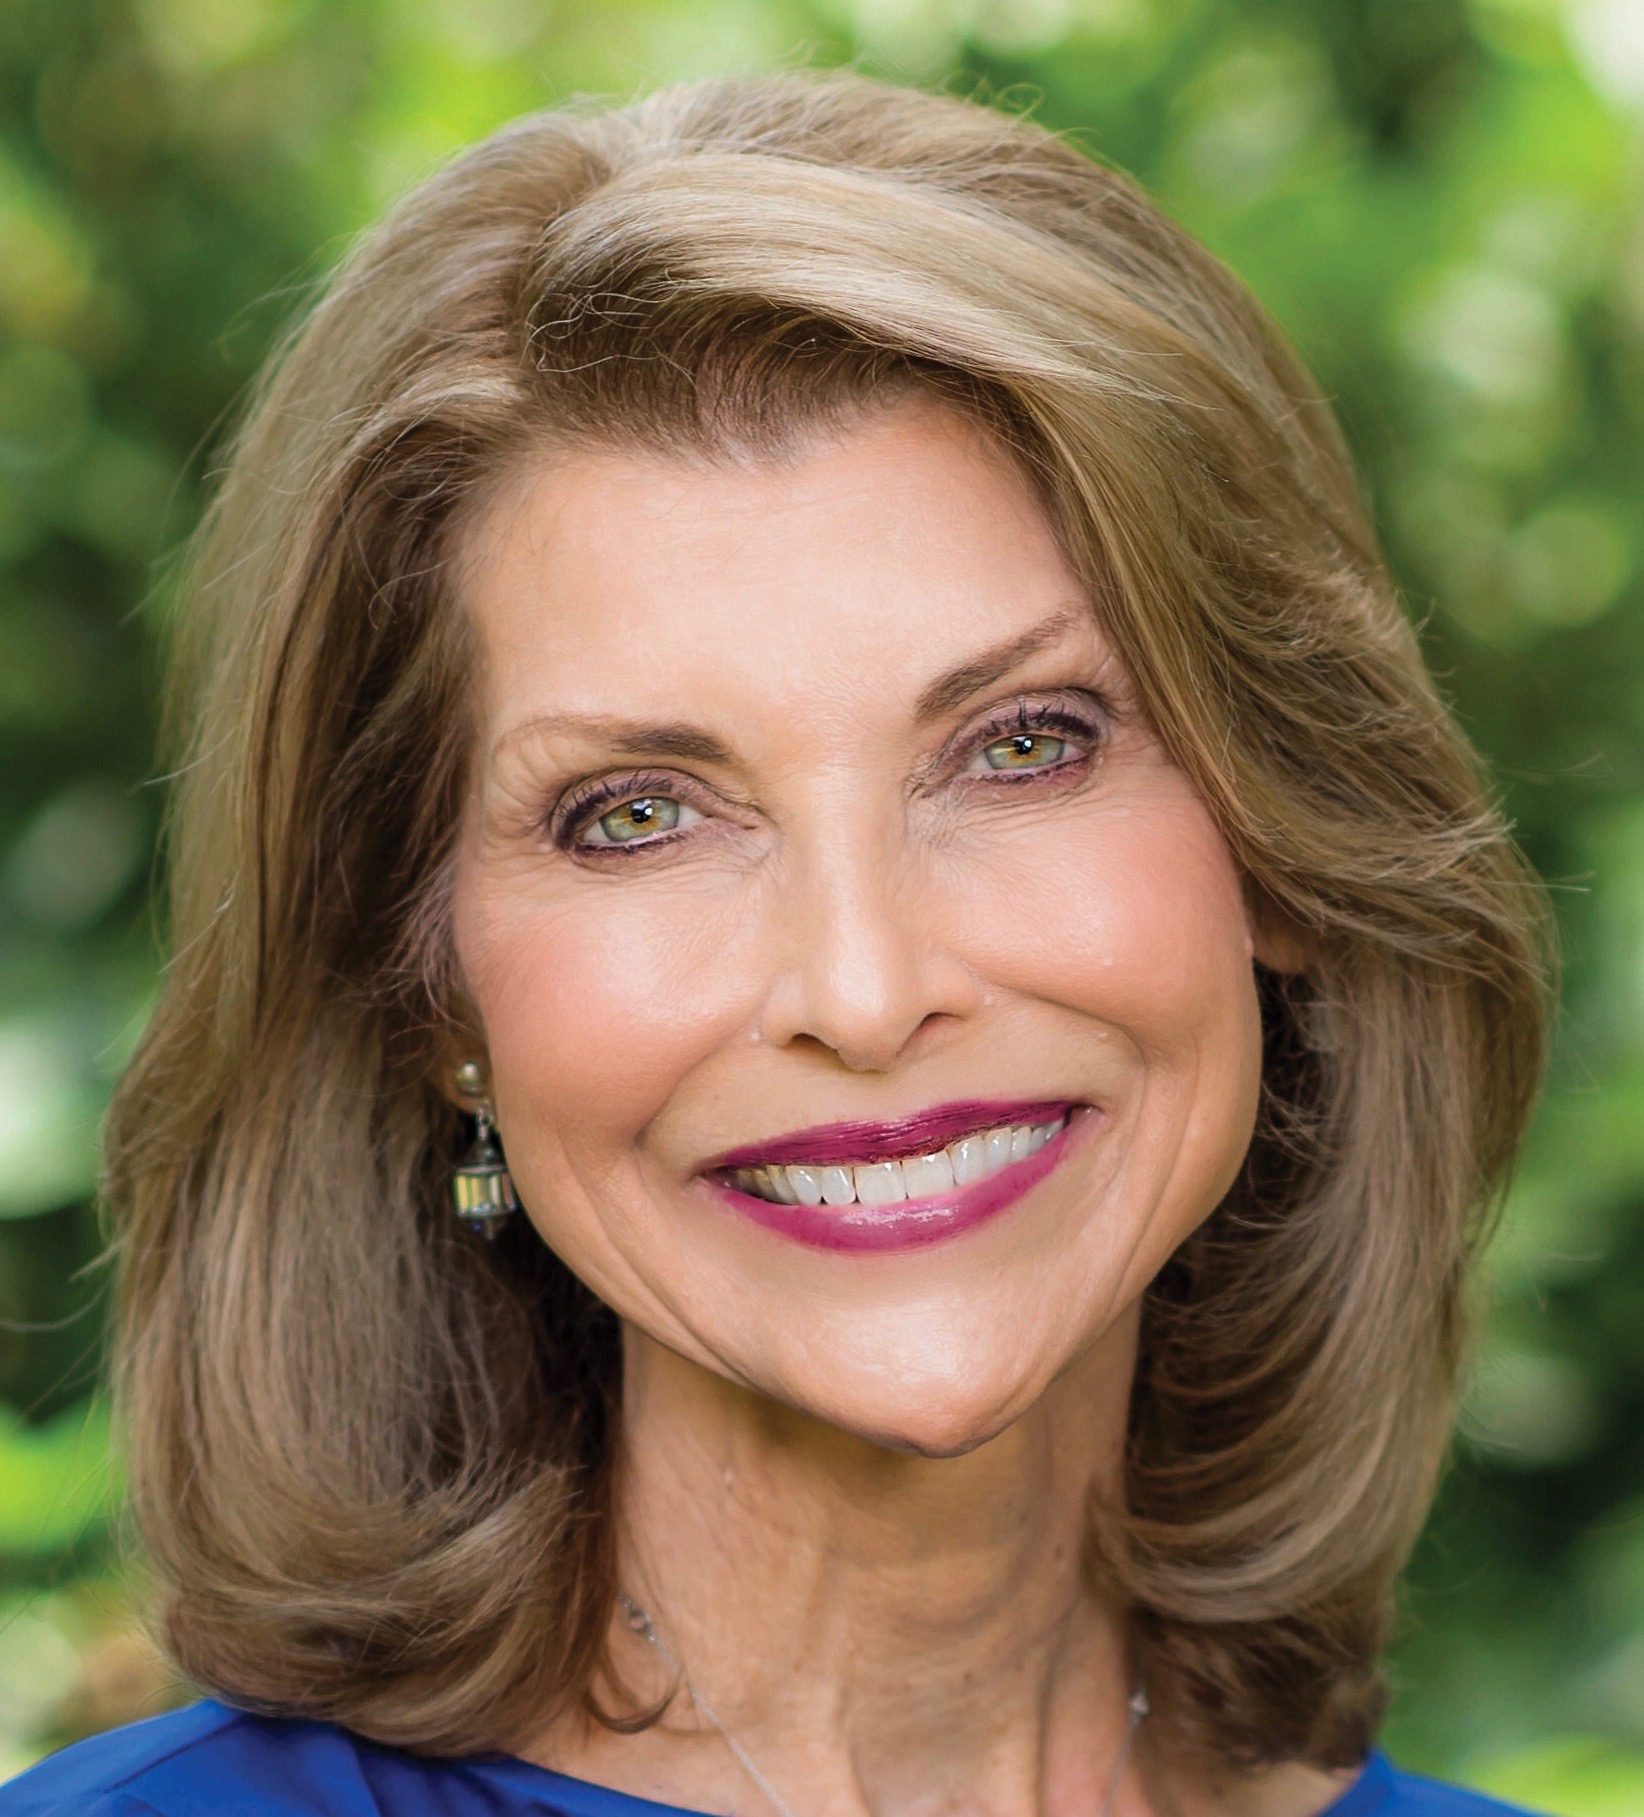 Pam Tebow